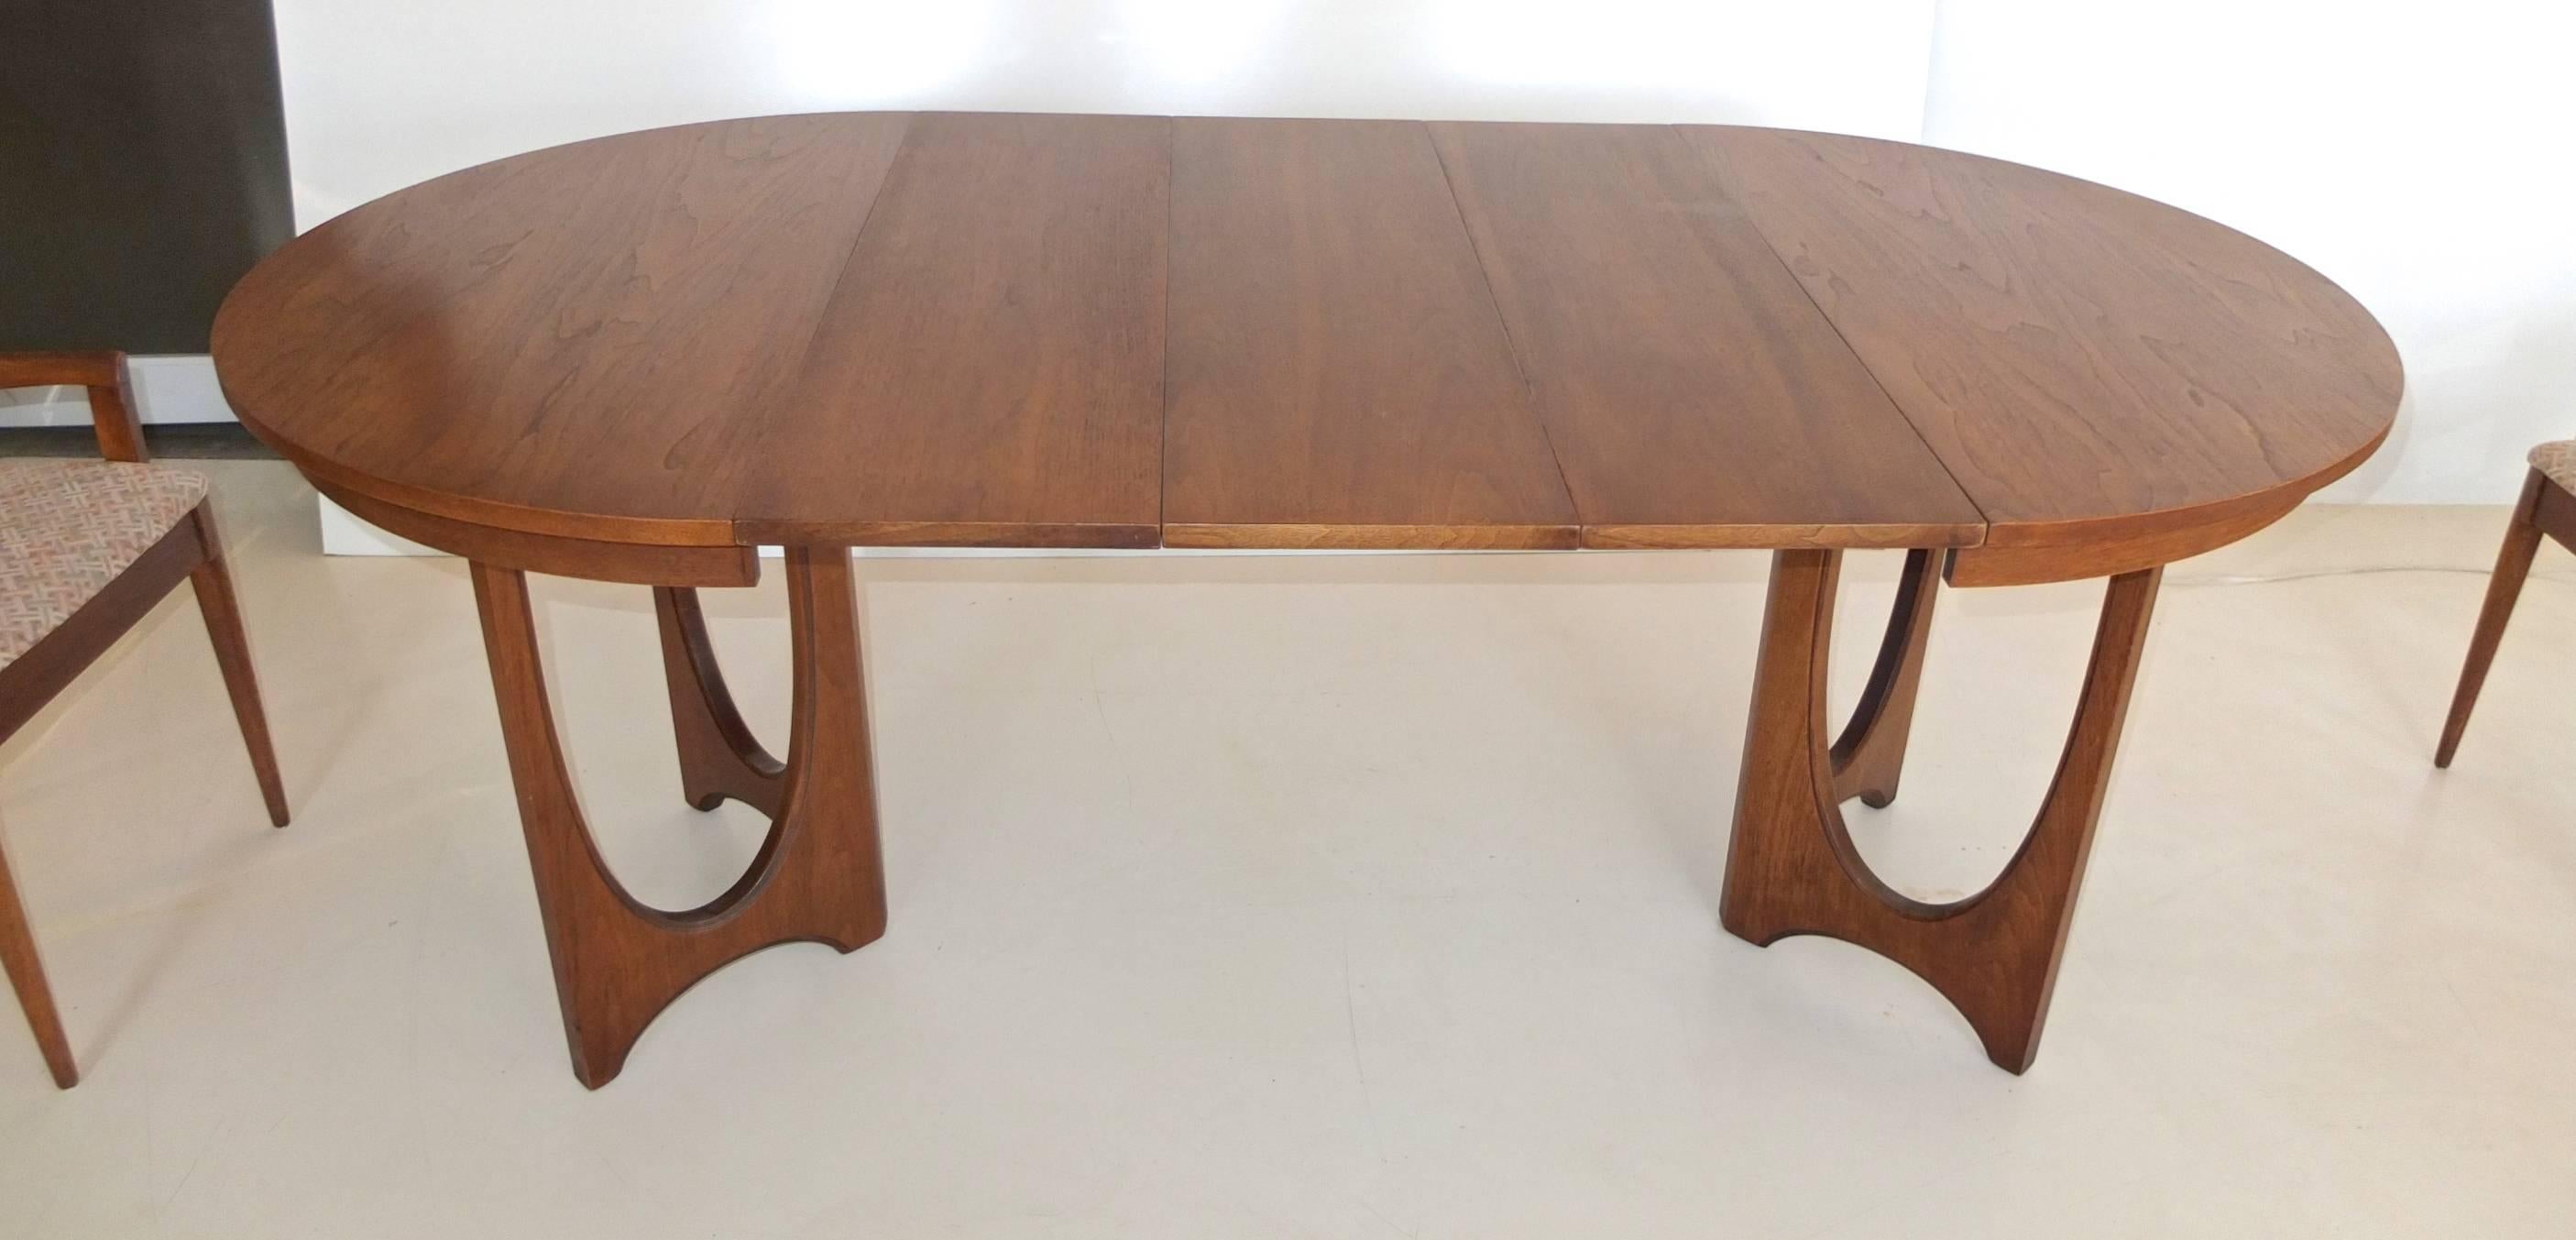 Mid-20th Century Broyhill Brasilia Walnut Dining Table and Chairs